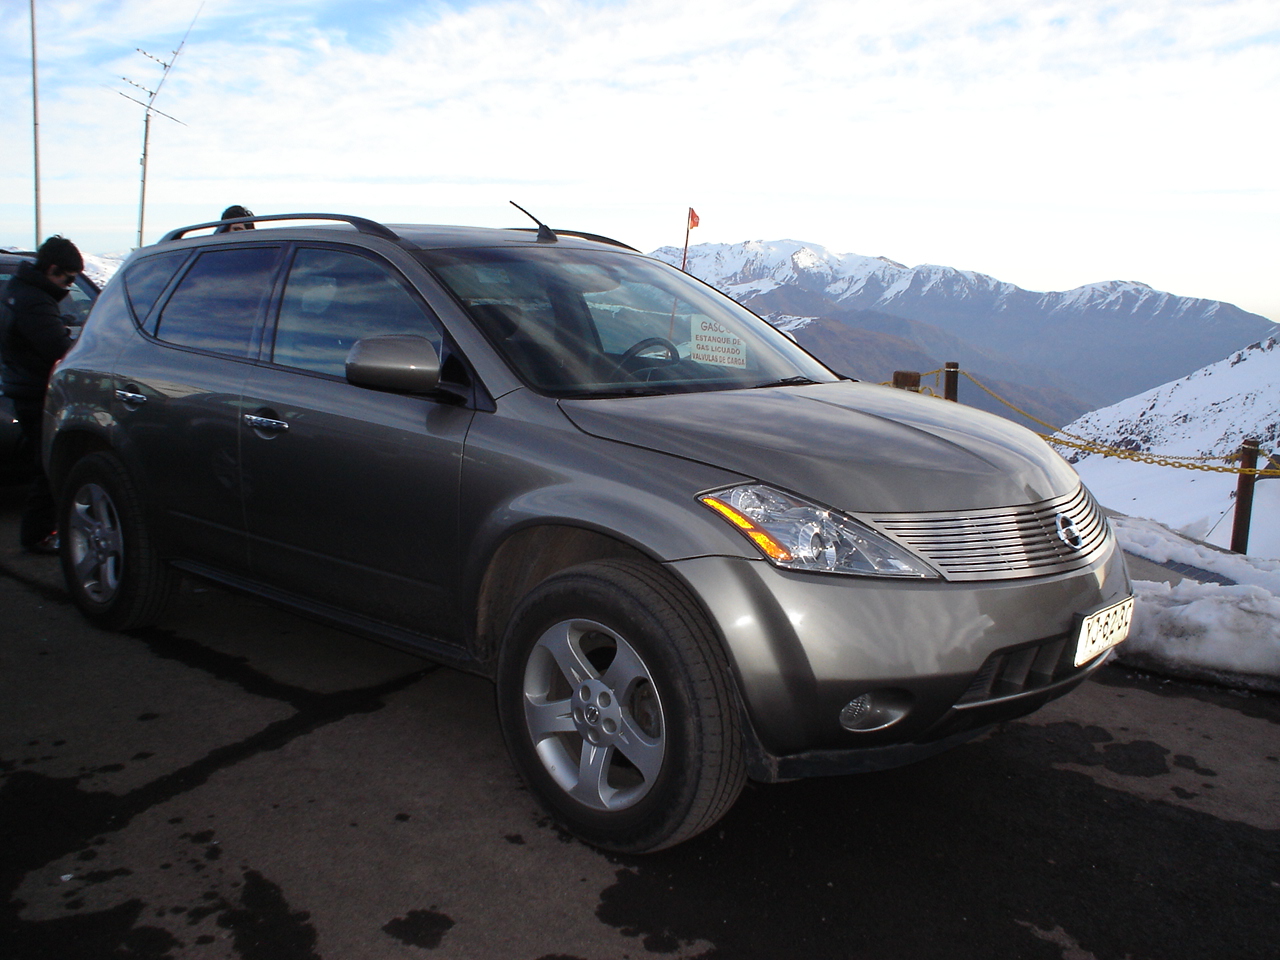 2005 Nissan murano sl review #10